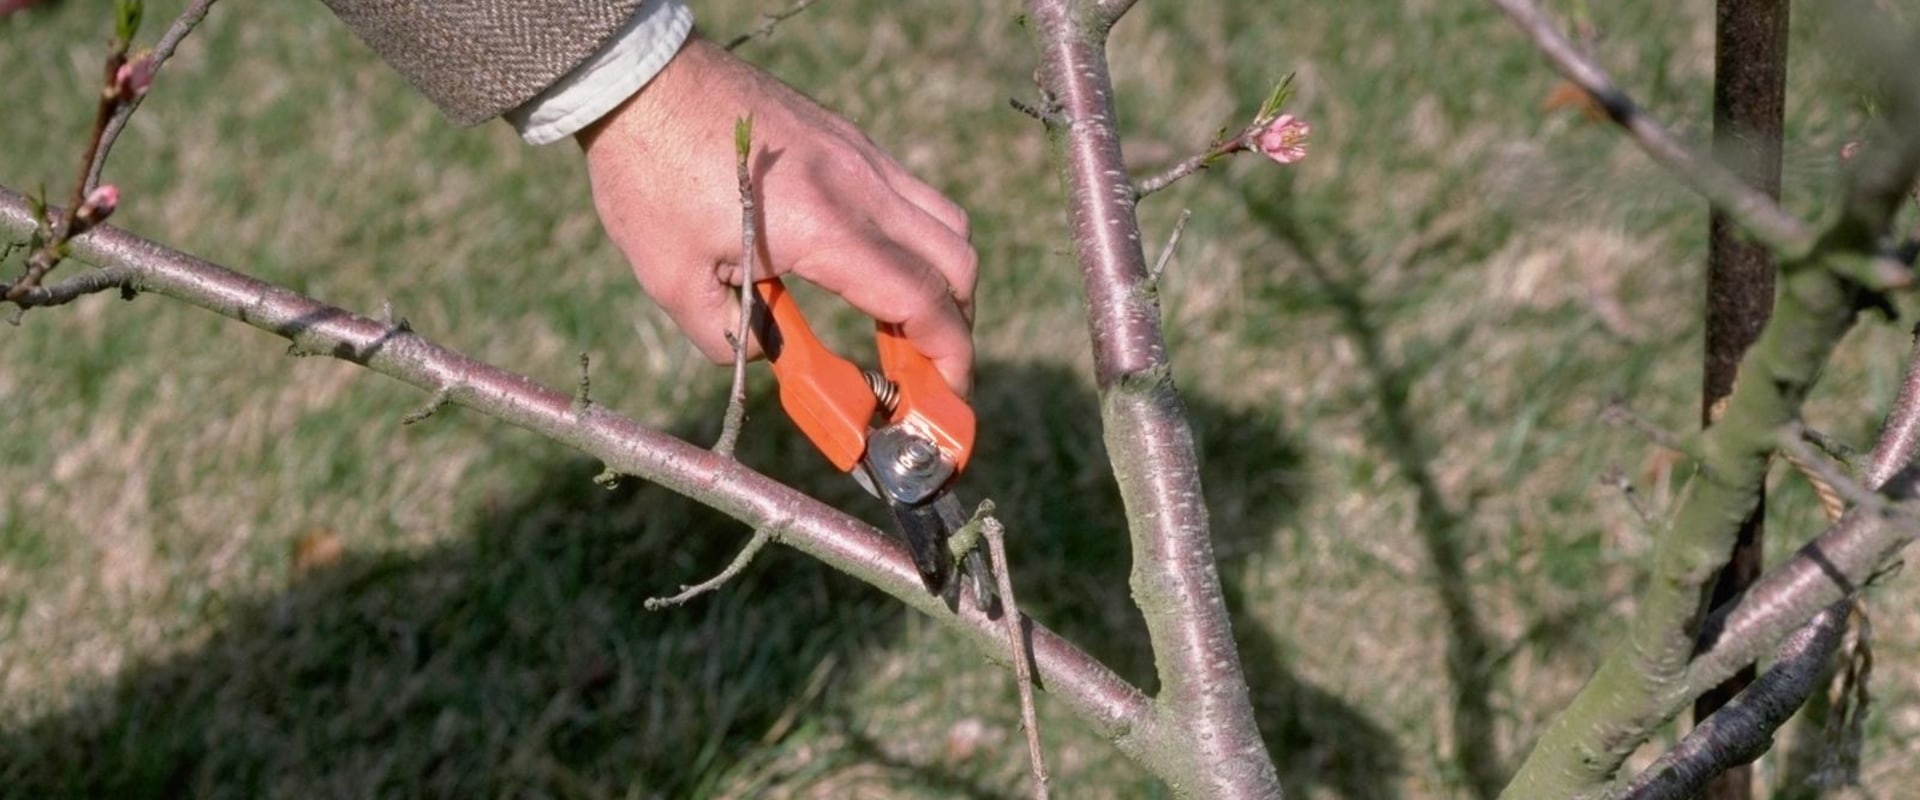 Pruning Young Trees Correctly: A Guide for Beginners